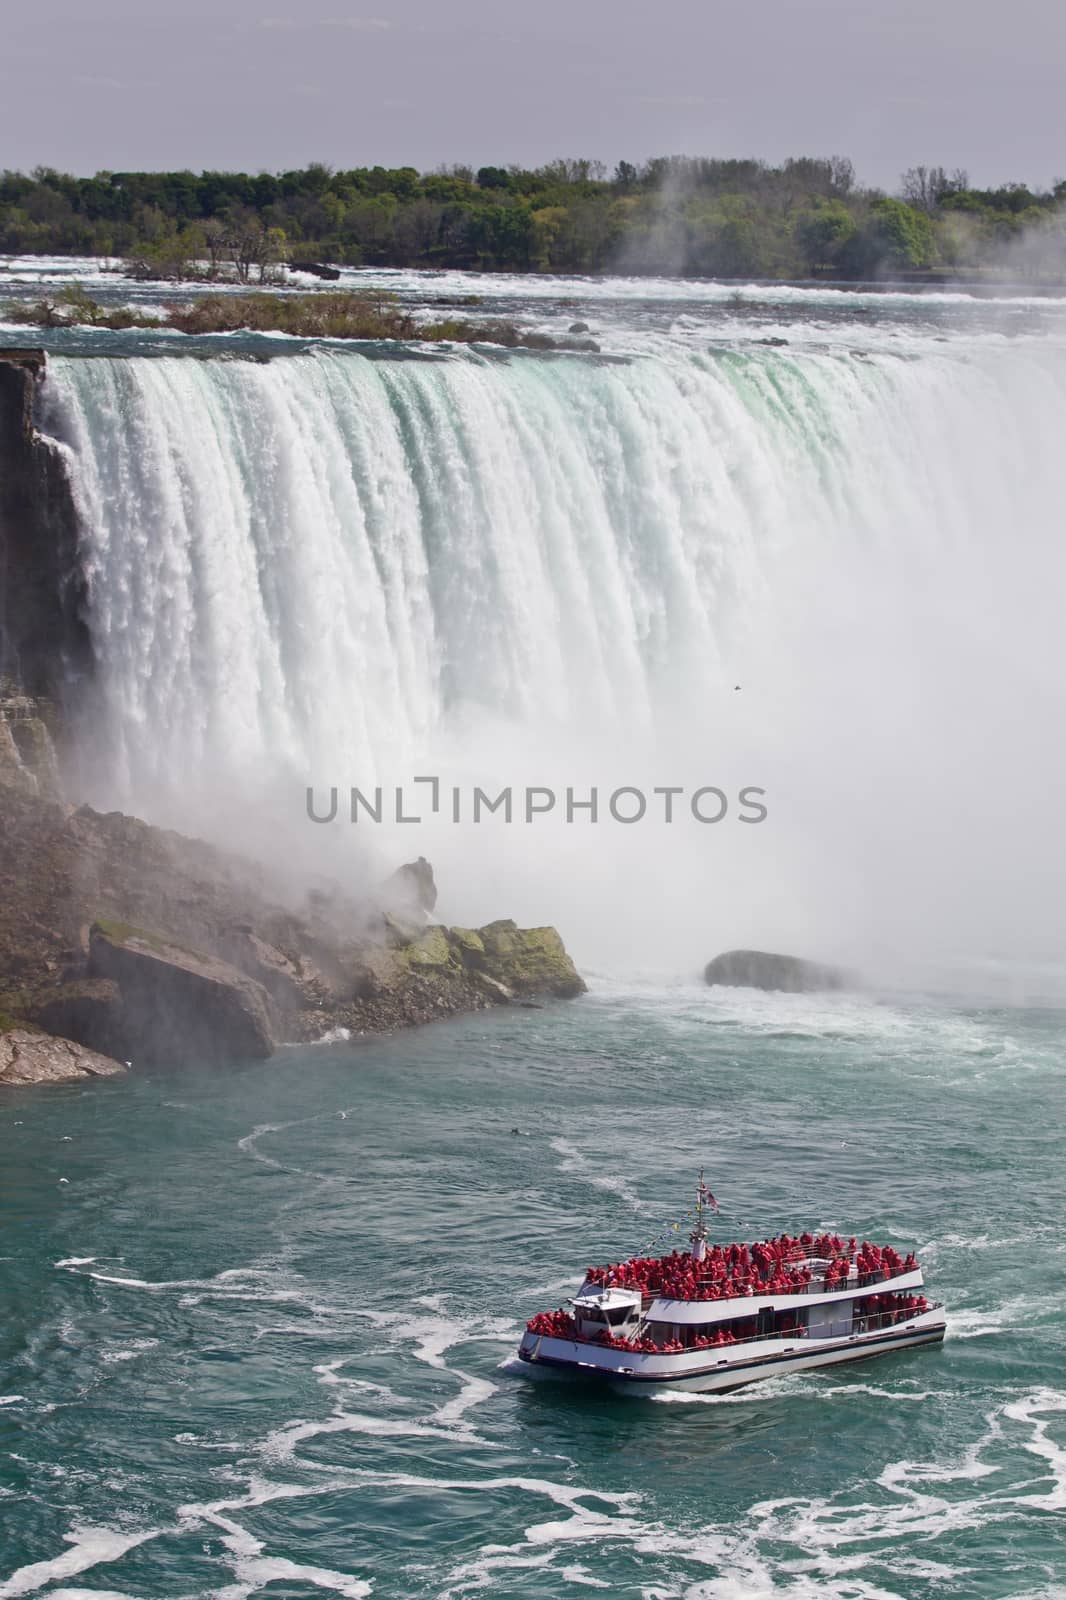 Beautiful isolated image of a ship and amazing Niagara waterfall by teo